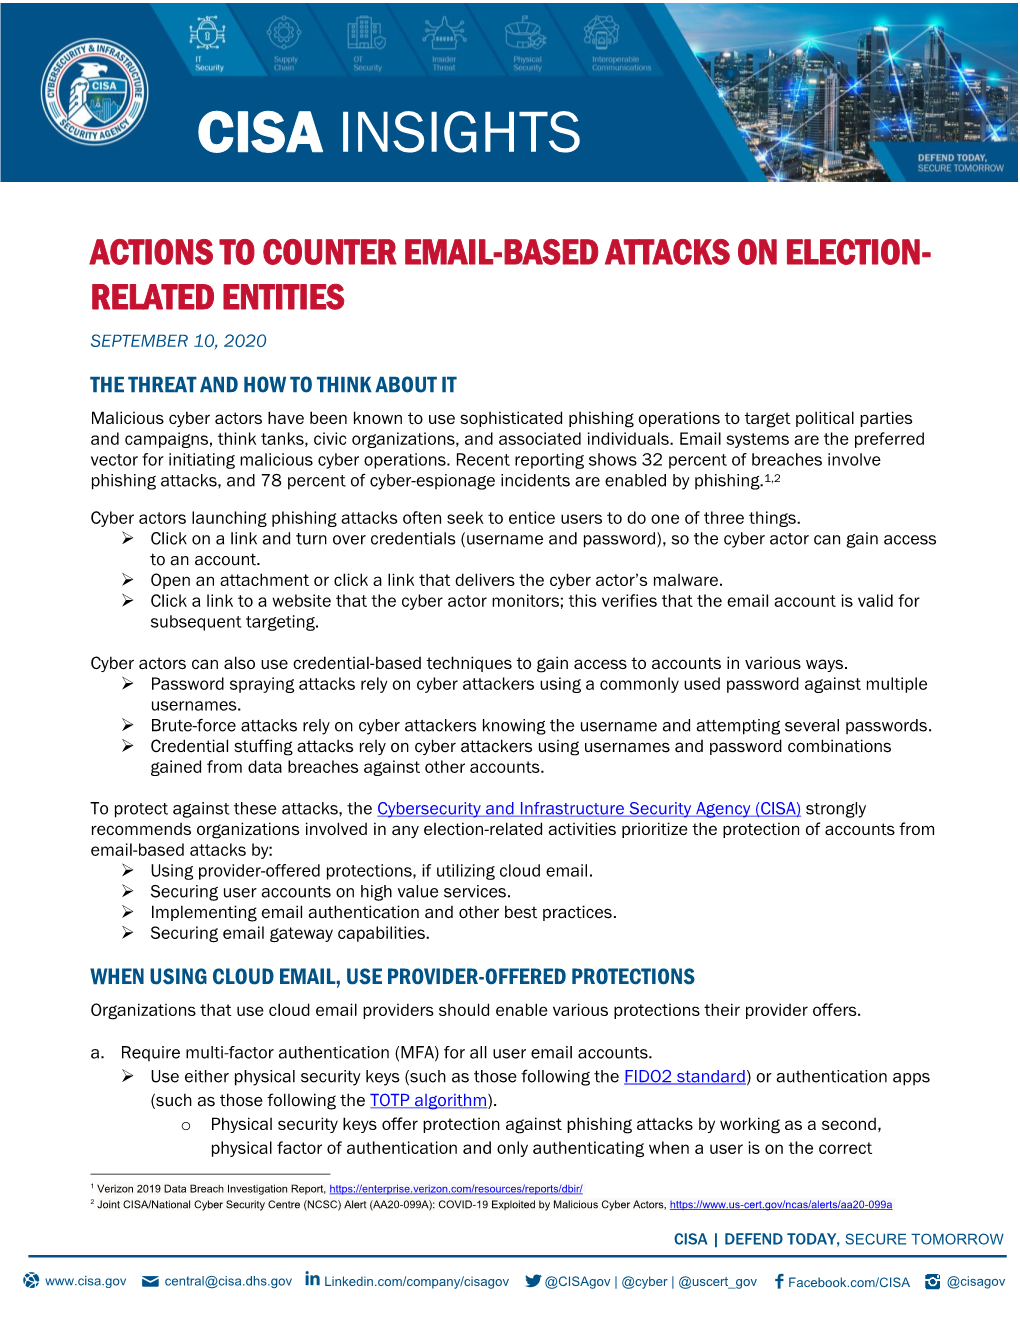 Actions to Counter Email-Based Attacks On